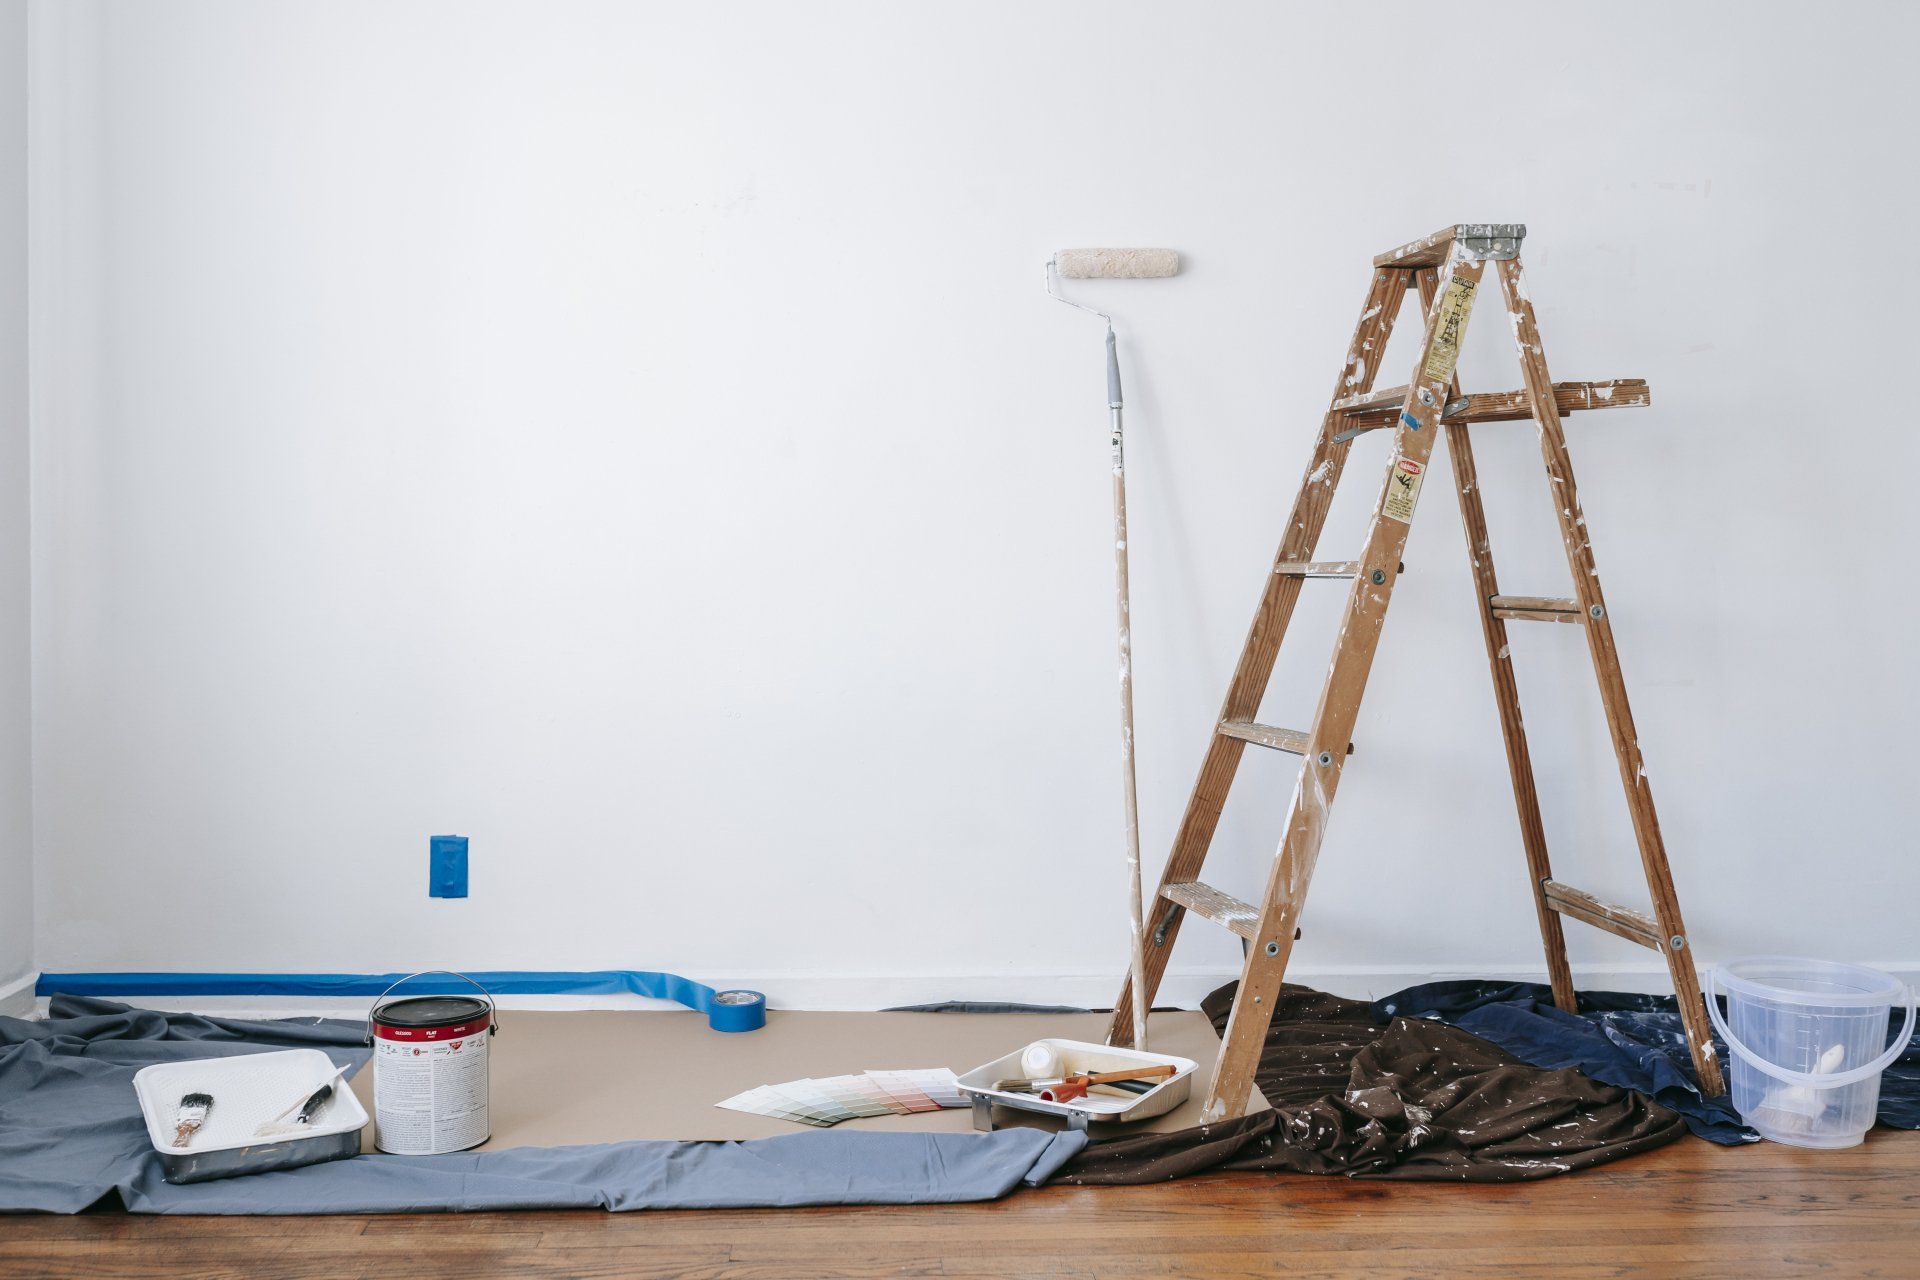 Home improvement equipment, such as a paint roller and ladder, in a room that is under renovation